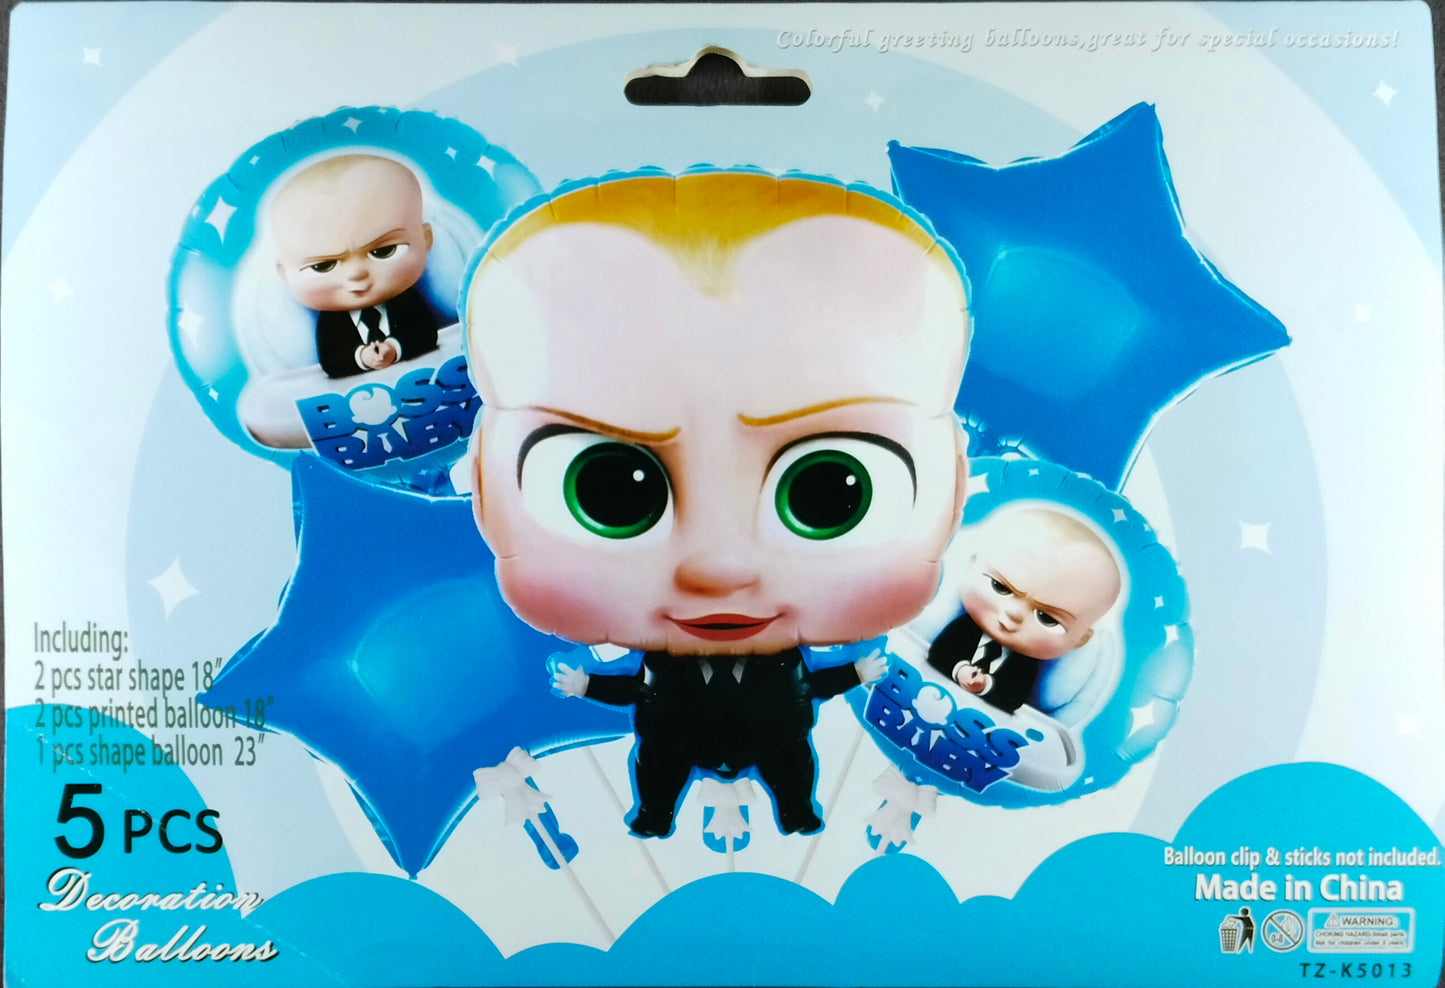 Boss Baby Foil Balloon - 5 pieces set for Simple Birthday Decorations at Home